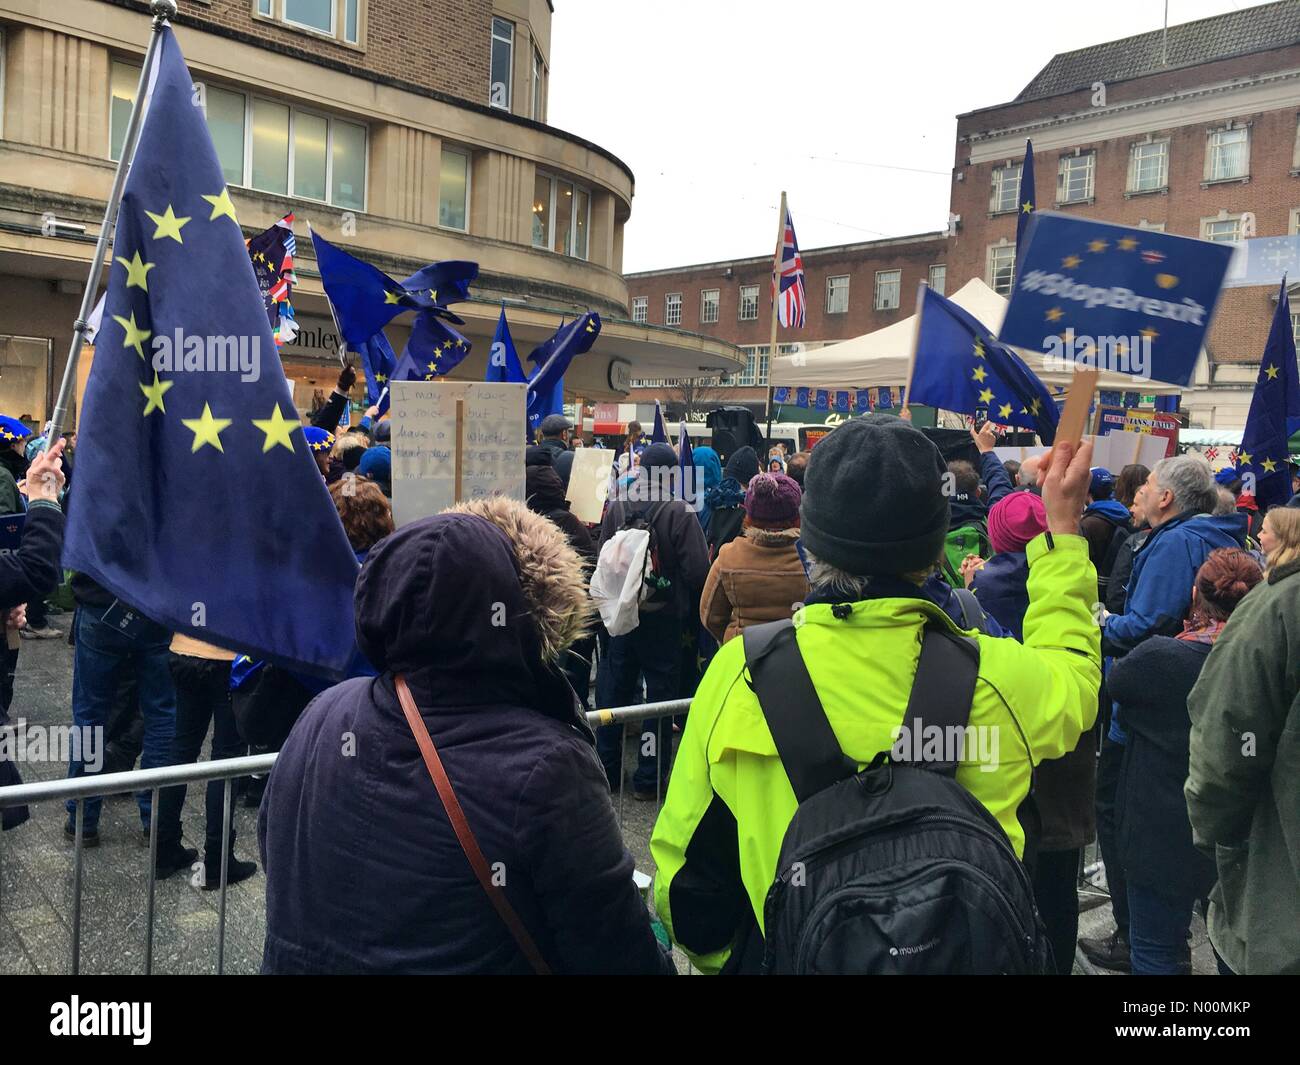 Exeter, UK. 24th March, 2018. Pro remain protest in Exeter Credit: BuzzB/StockimoNews/Alamy Live News Stock Photo